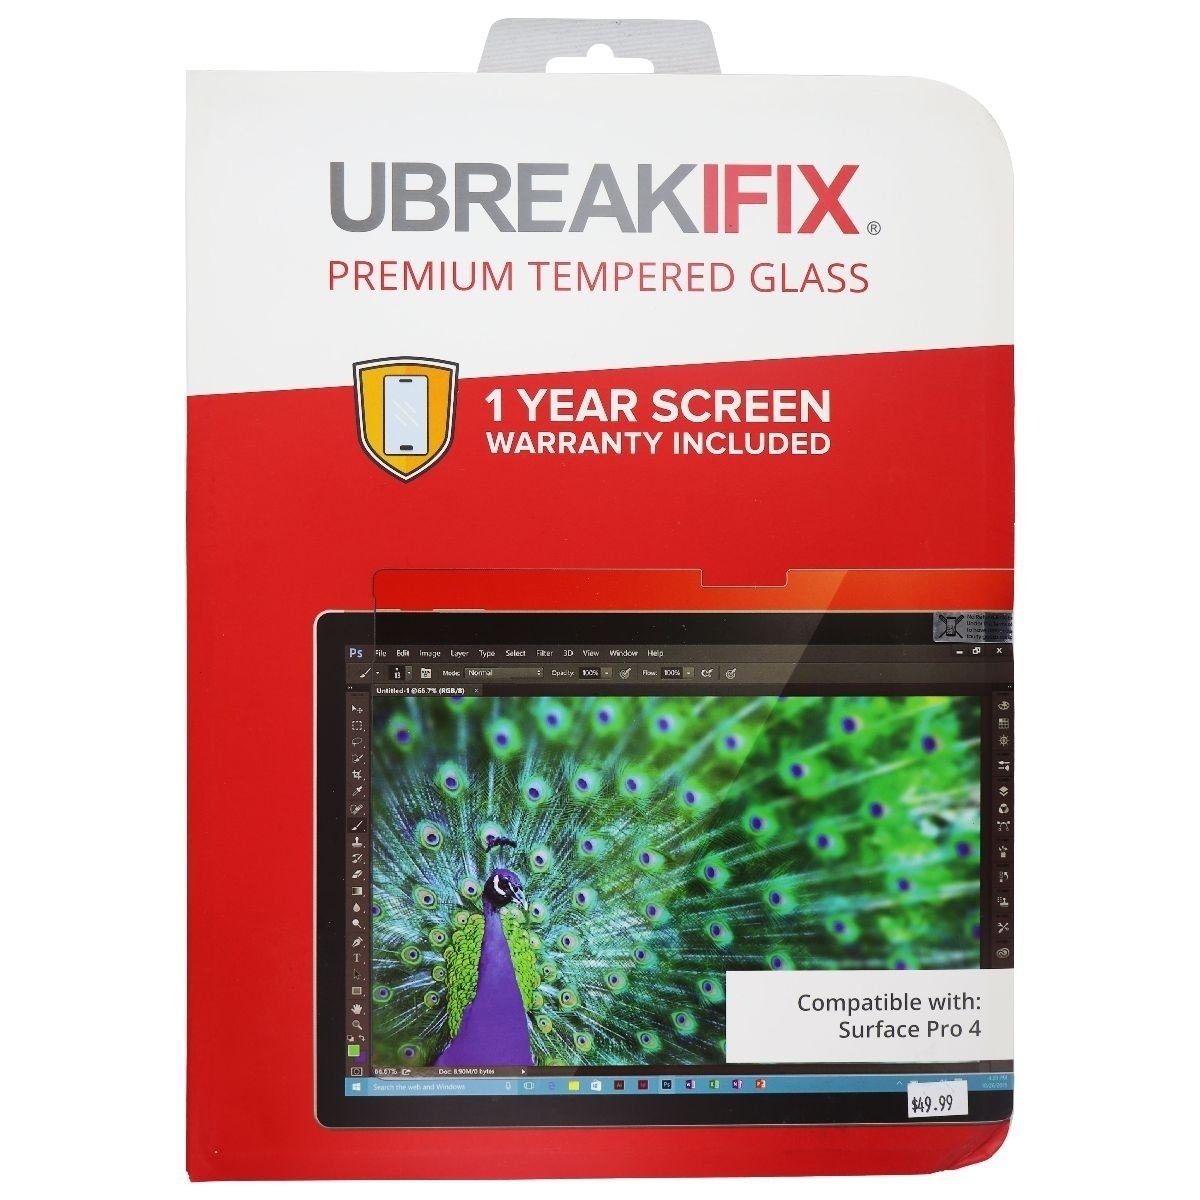 UBREAKIFIX Premium Tempered Glass For Microsoft Surface Pro 4 - Clear